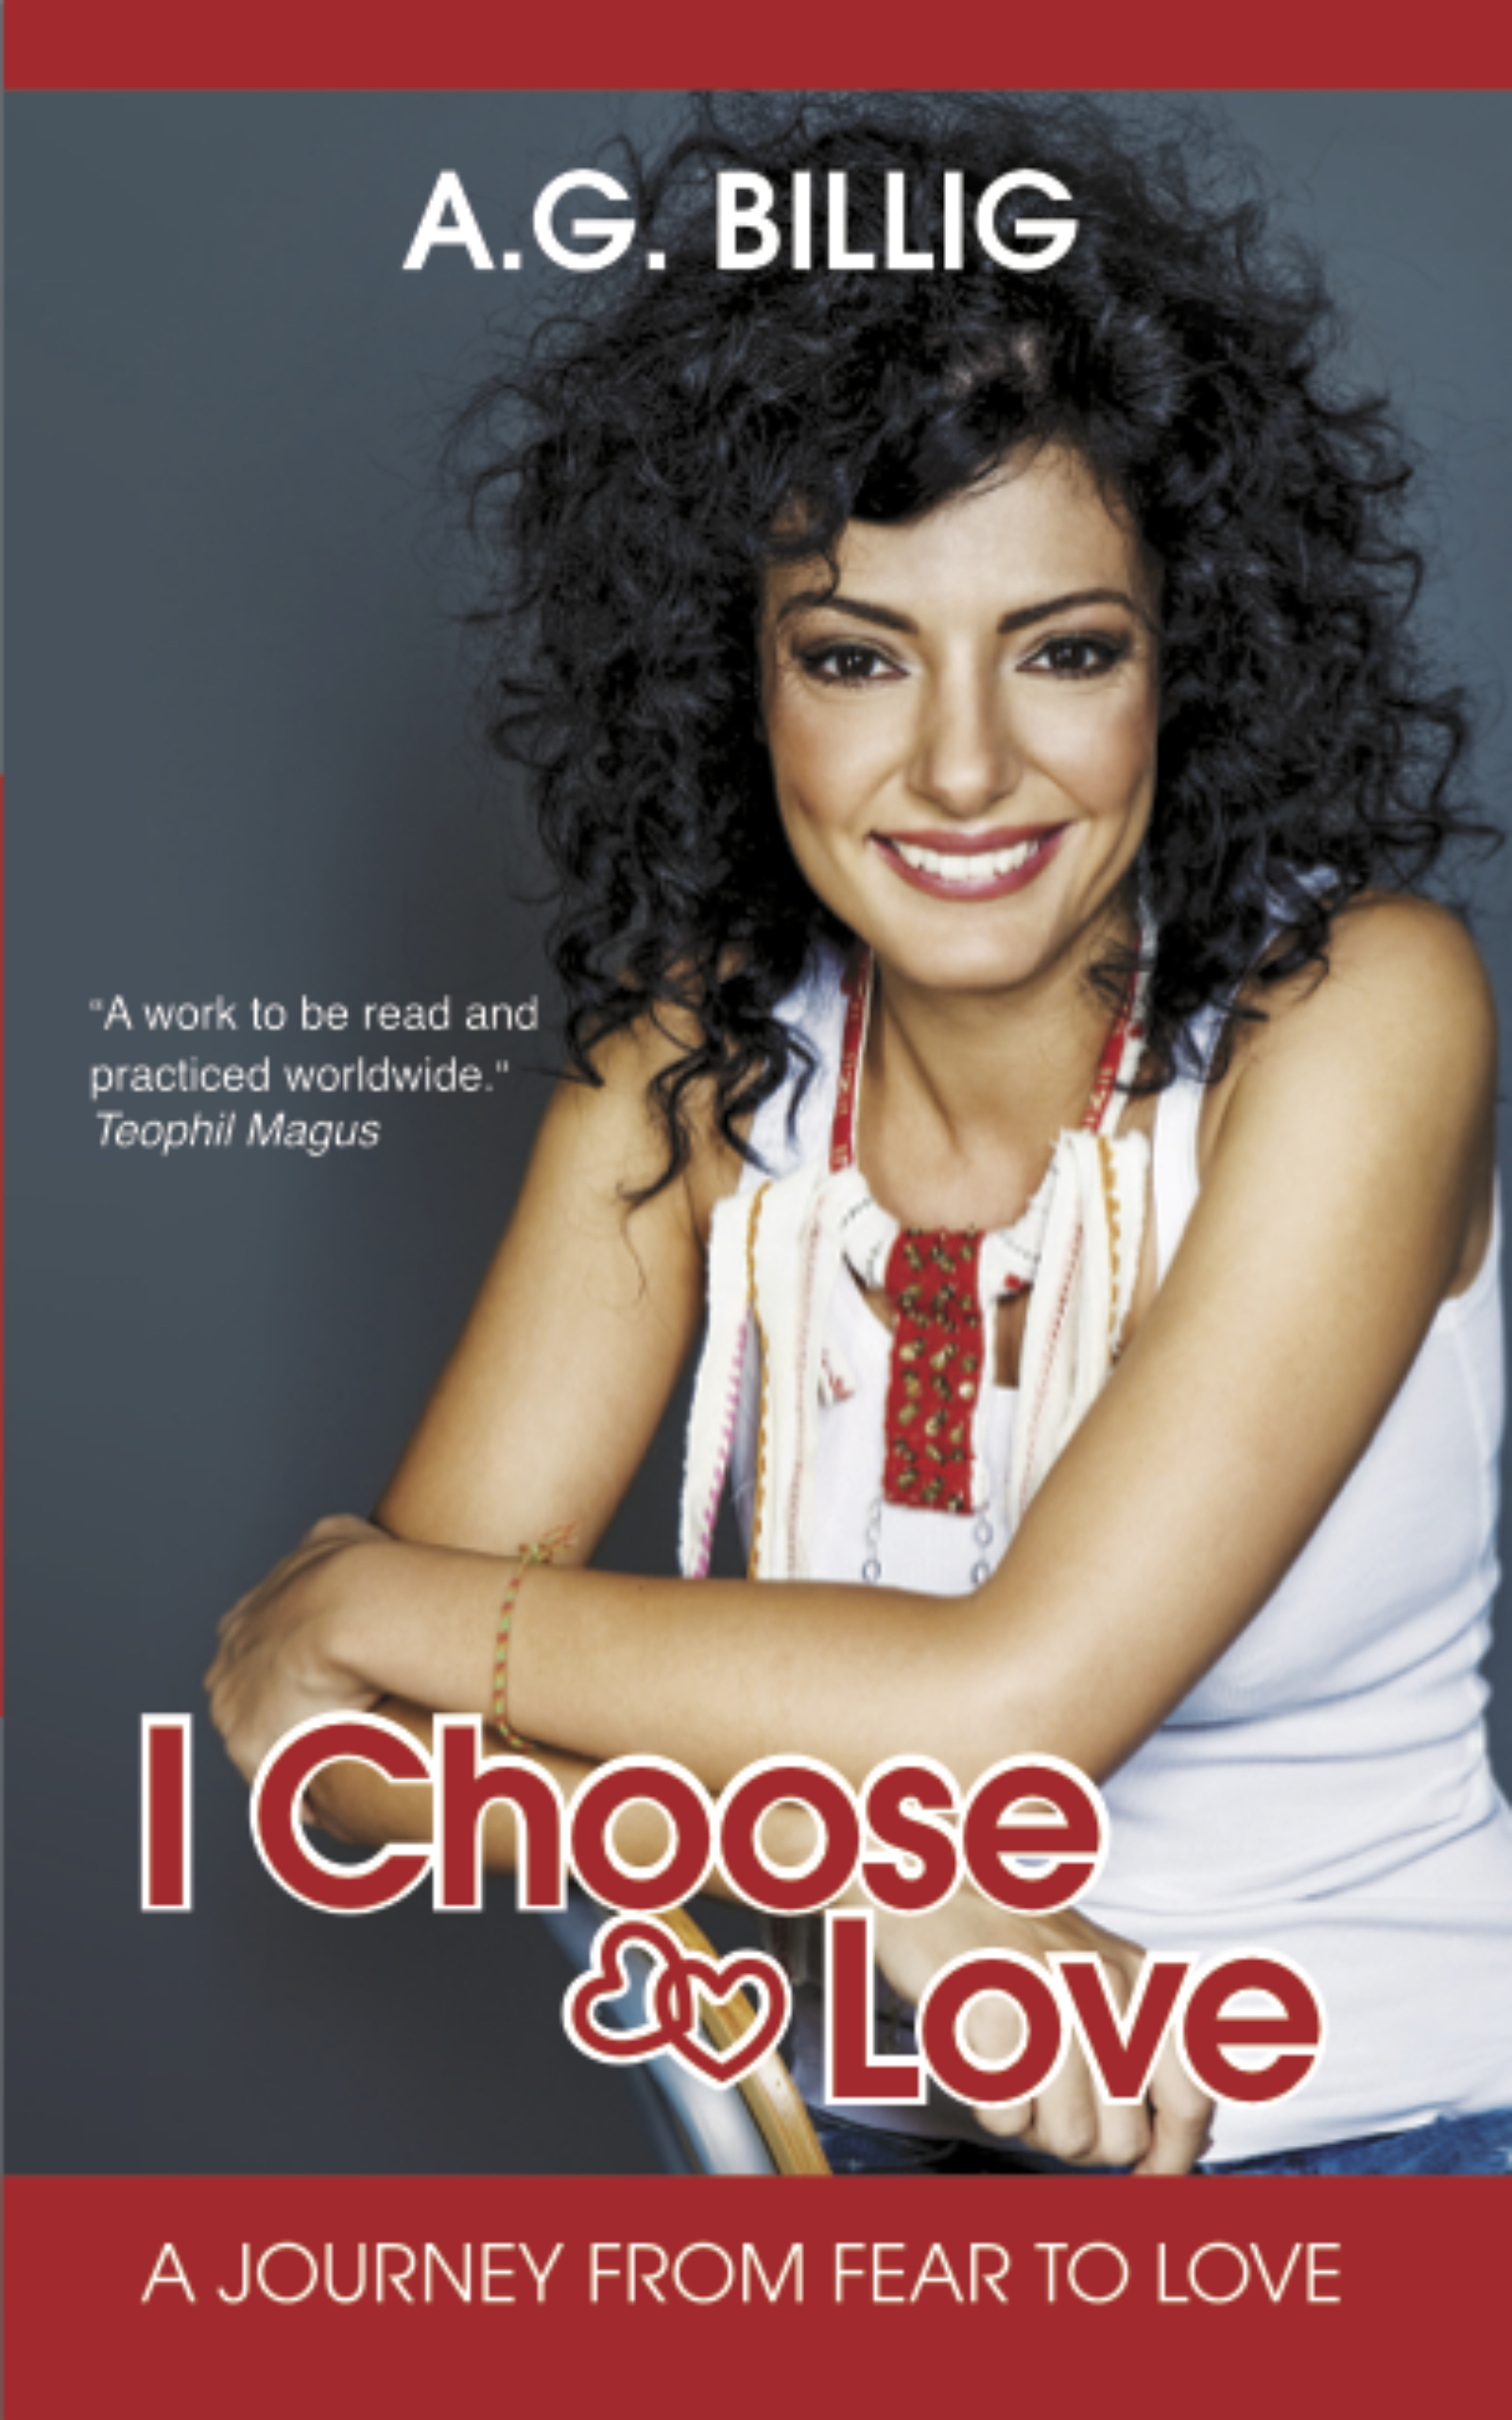 I CHOOSE LOVE: A JOURNEY FROM FEAR TO LOVE